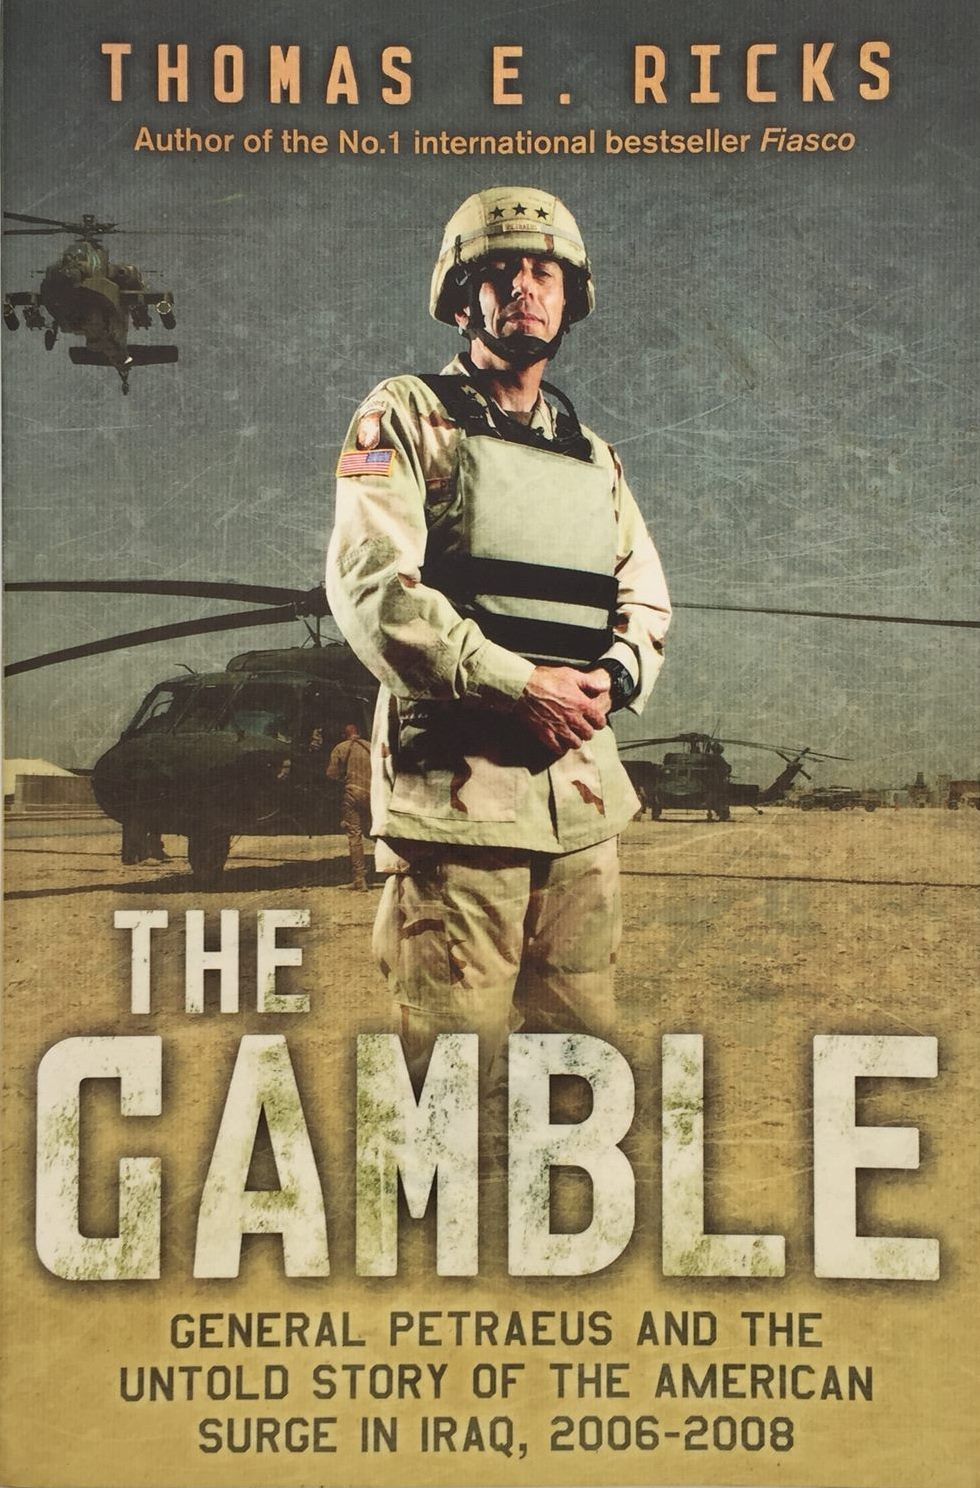 THE GAMBLE: General Petraeus and the Untold Story of the American Surge in Iraq, 2006-2008